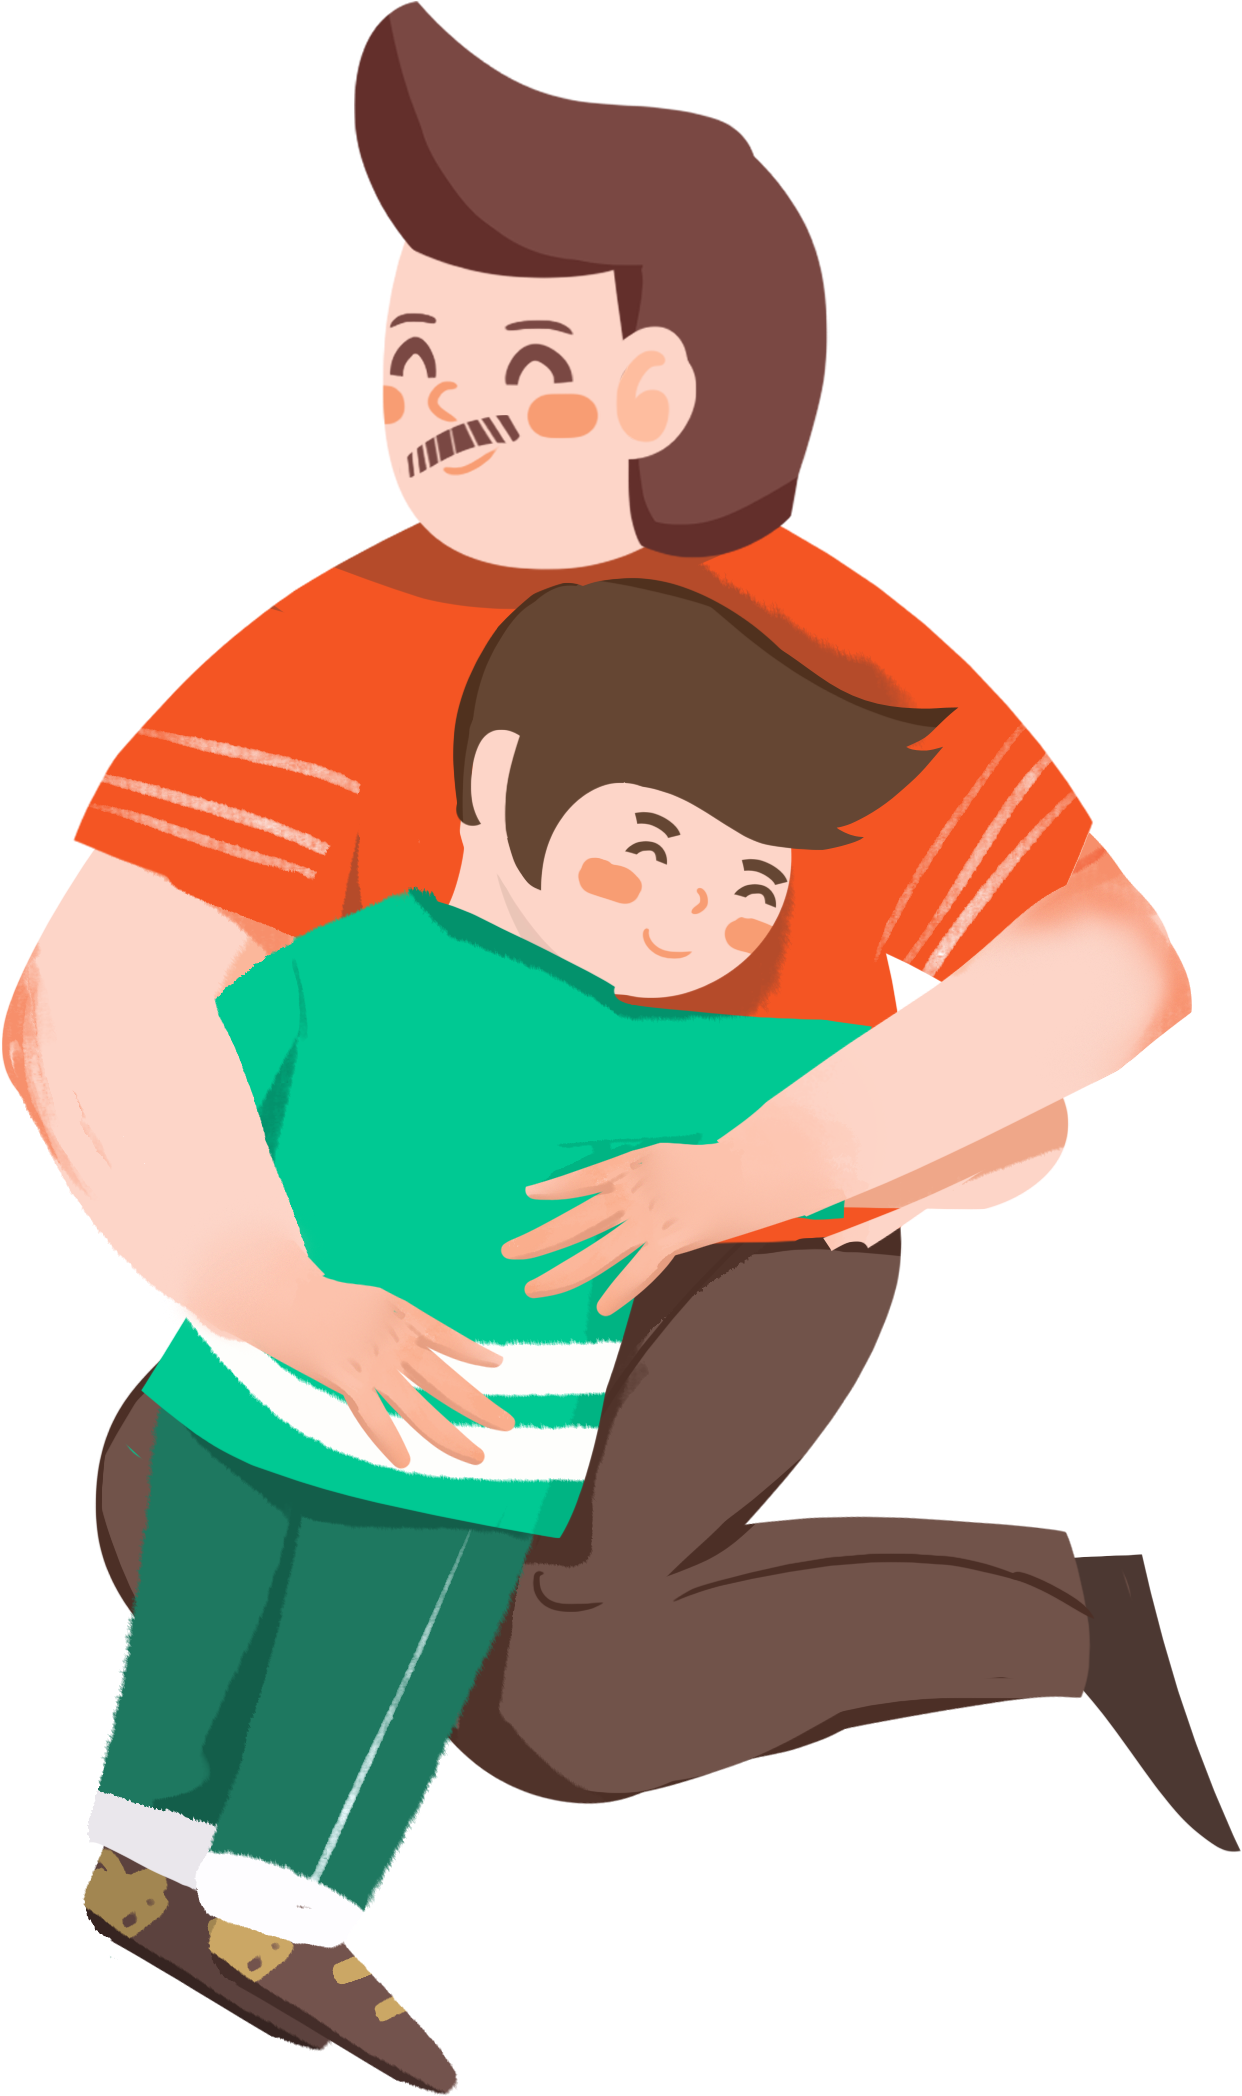 Father Son Embrace Illustration.png